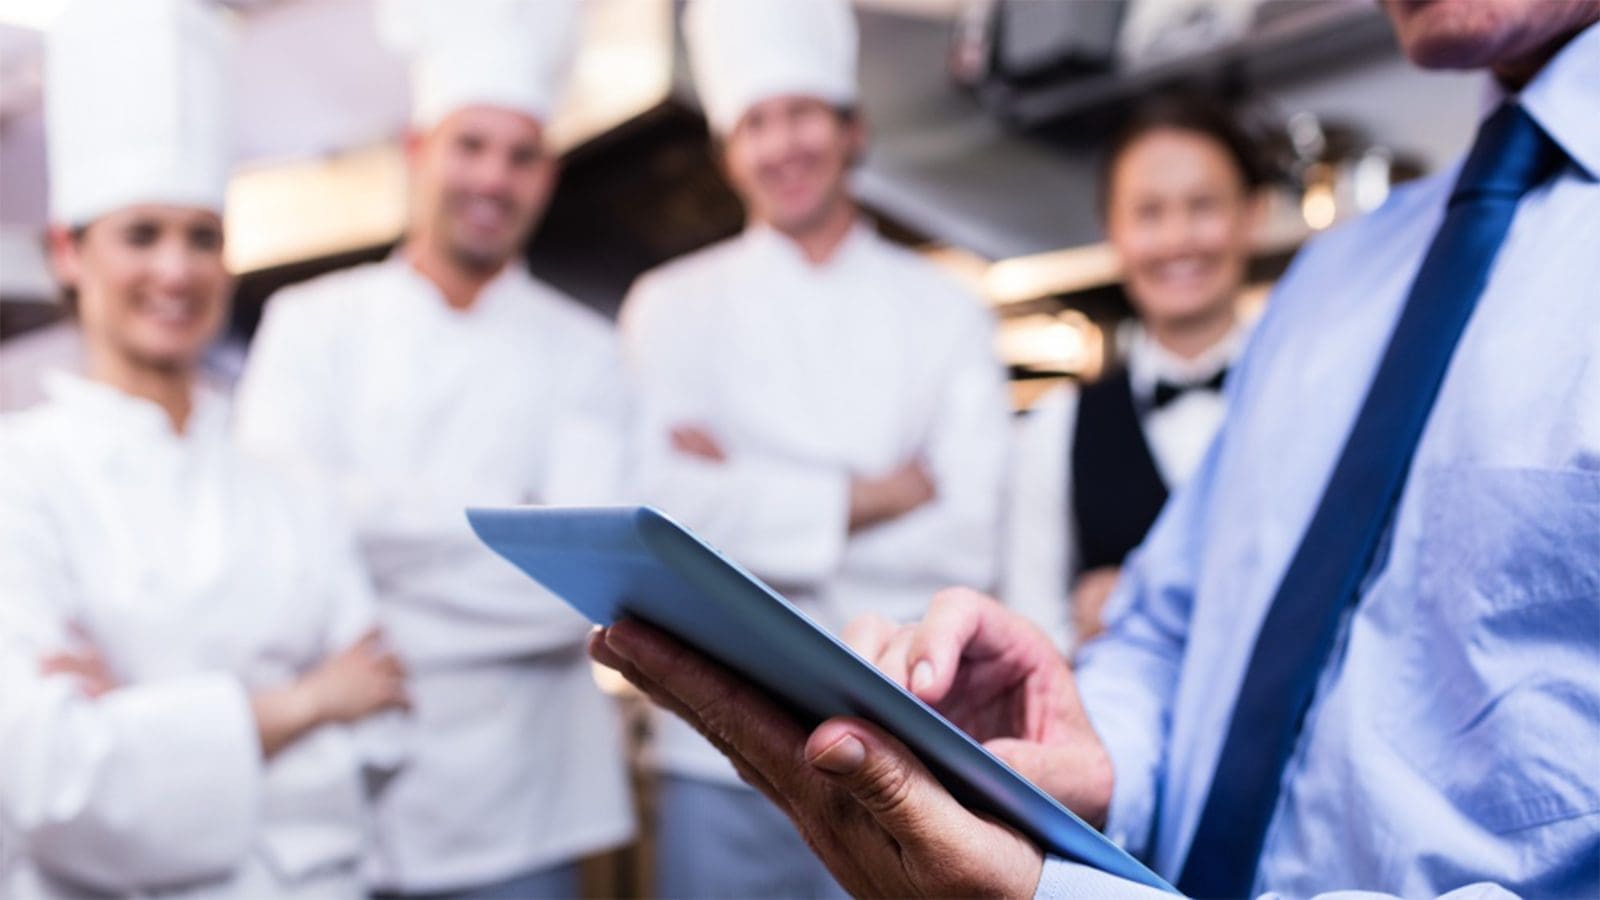 Unified’s IoT Service enables restaurants to automate and optimize operations